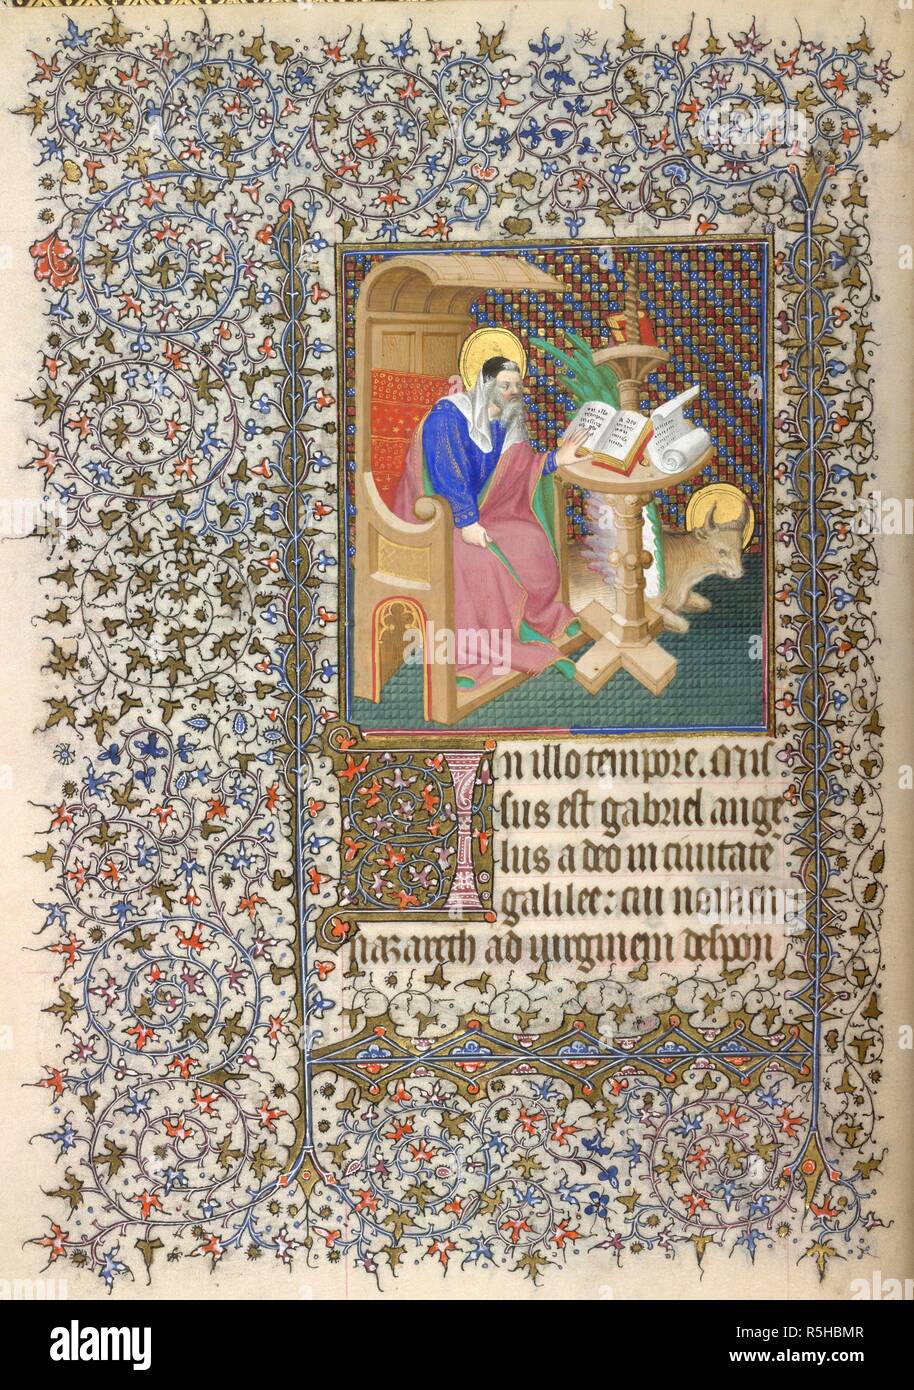 Miniature of Luke as a scribe, with his symbol the ox, with an illuminated initial 'I'(n), and a full foliate border, at the beginning of Luke's Gospel. Book of Hours, Use of Paris. France, Central (Paris); c. 1410 - c. 1420. Source: Yates Thompson 46, f.14v. Language: Latin and French. Stock Photo